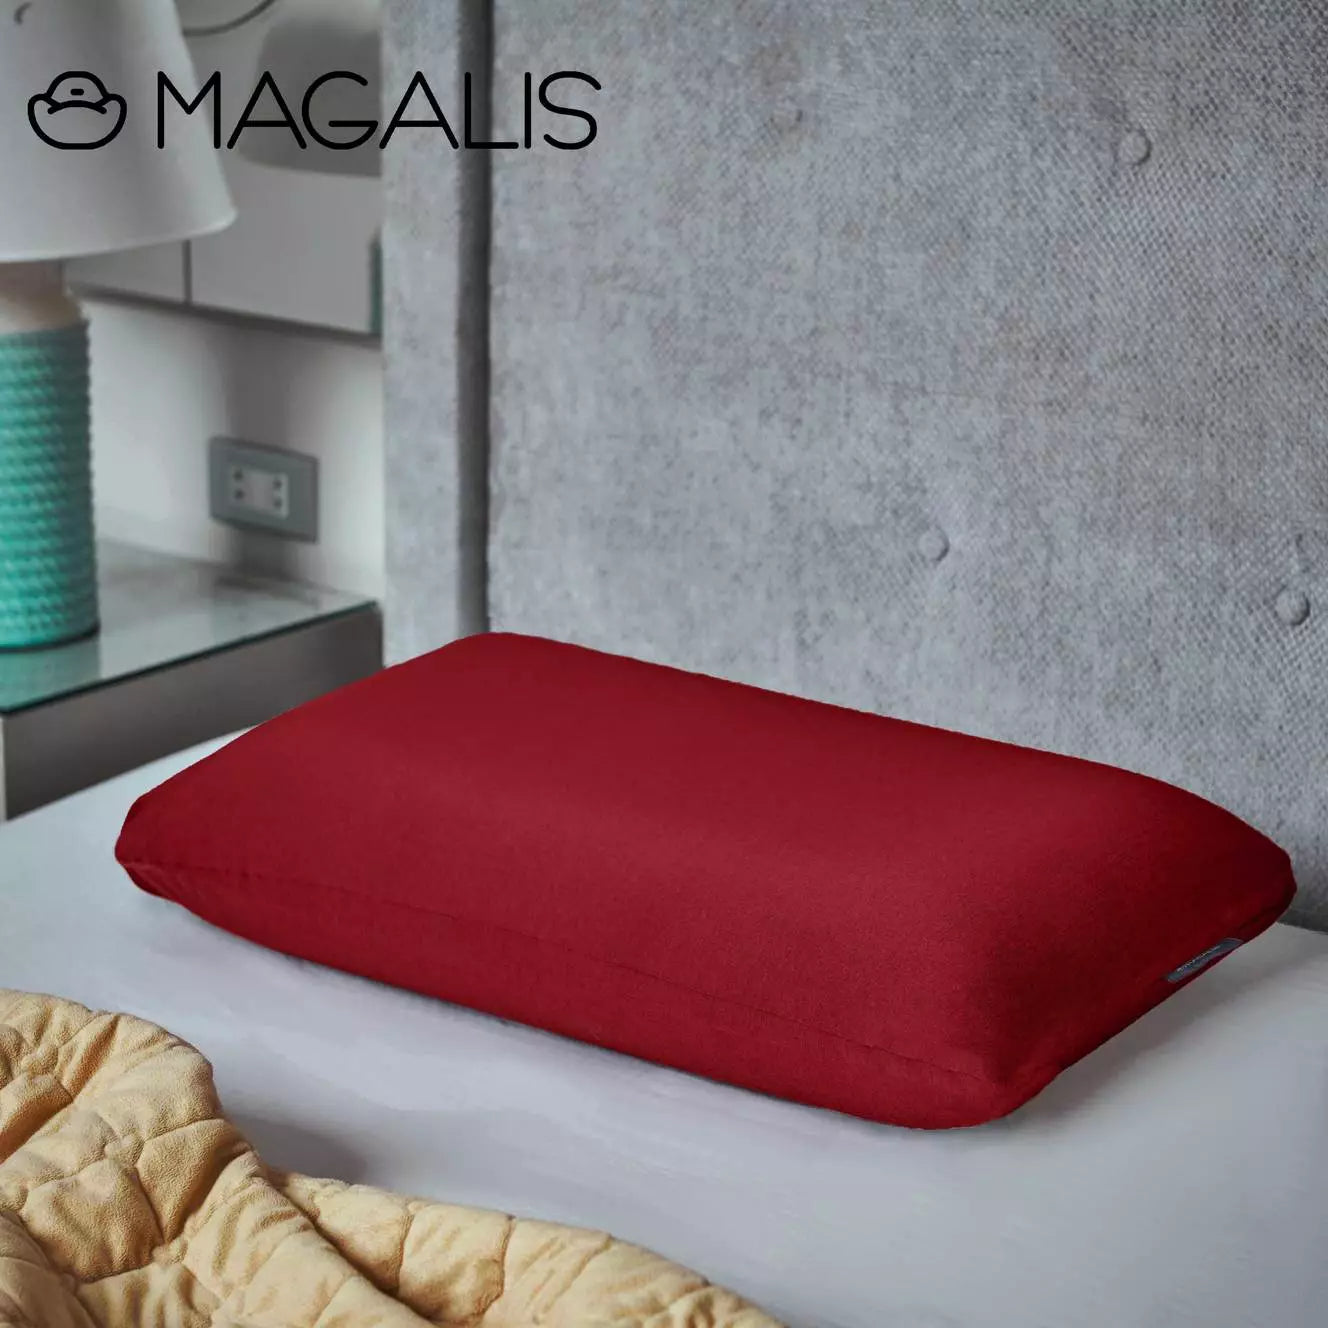 Classic Pain Relief Memory Foam Pillow - Magalis Egypt